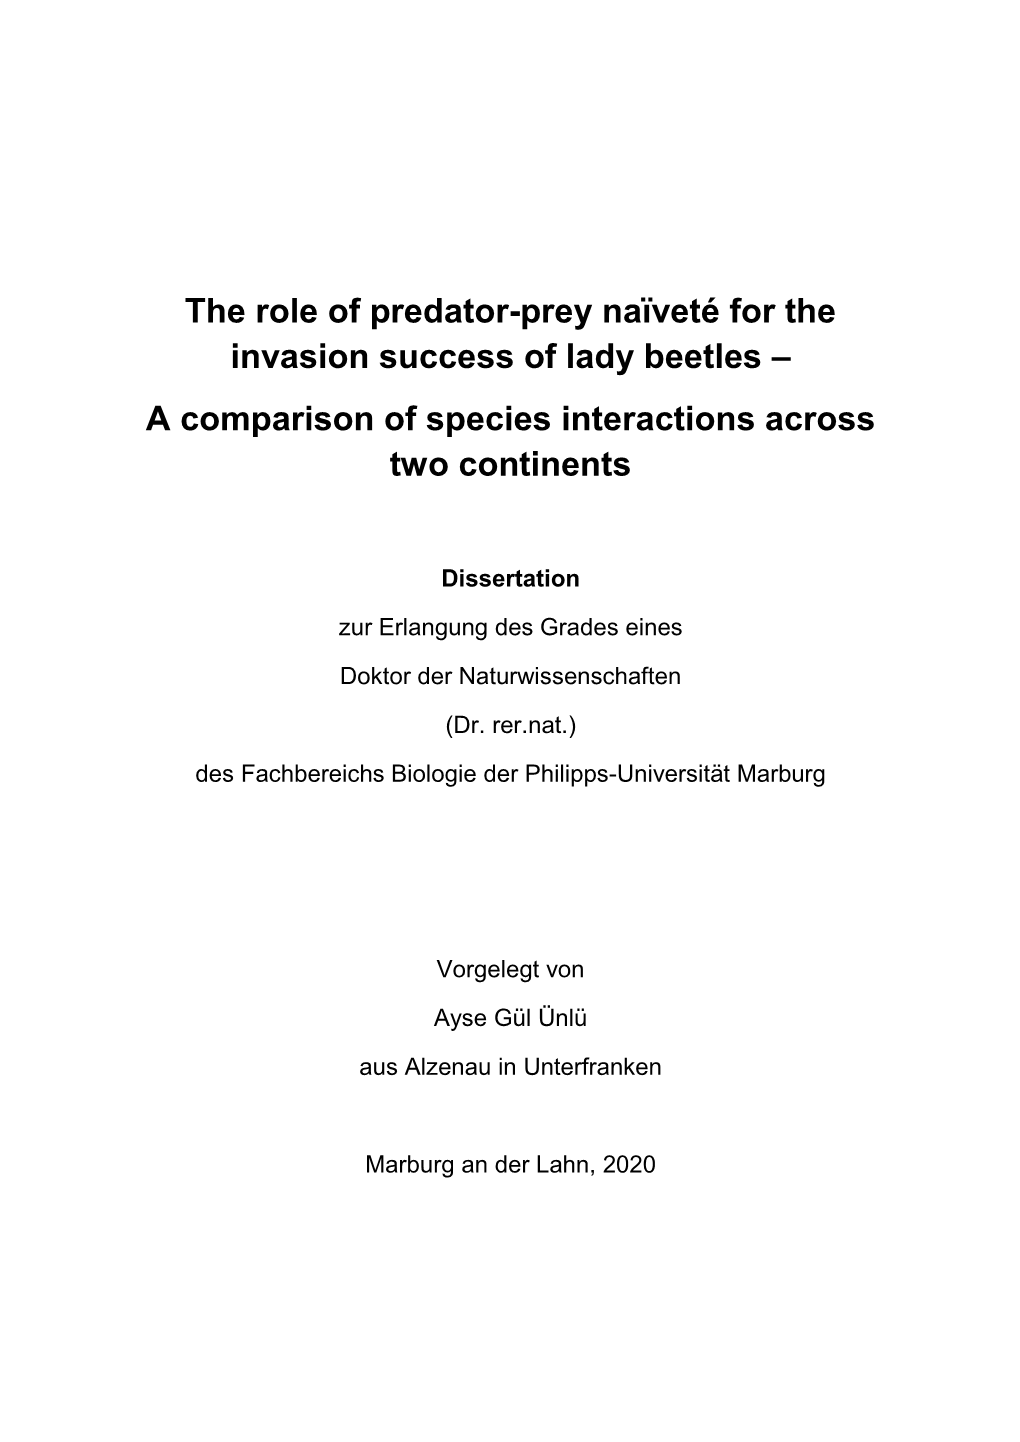 The Role of Predator-Prey Naïveté for the Invasion Success of Lady Beetles – a Comparison of Species Interactions Across Two Continents